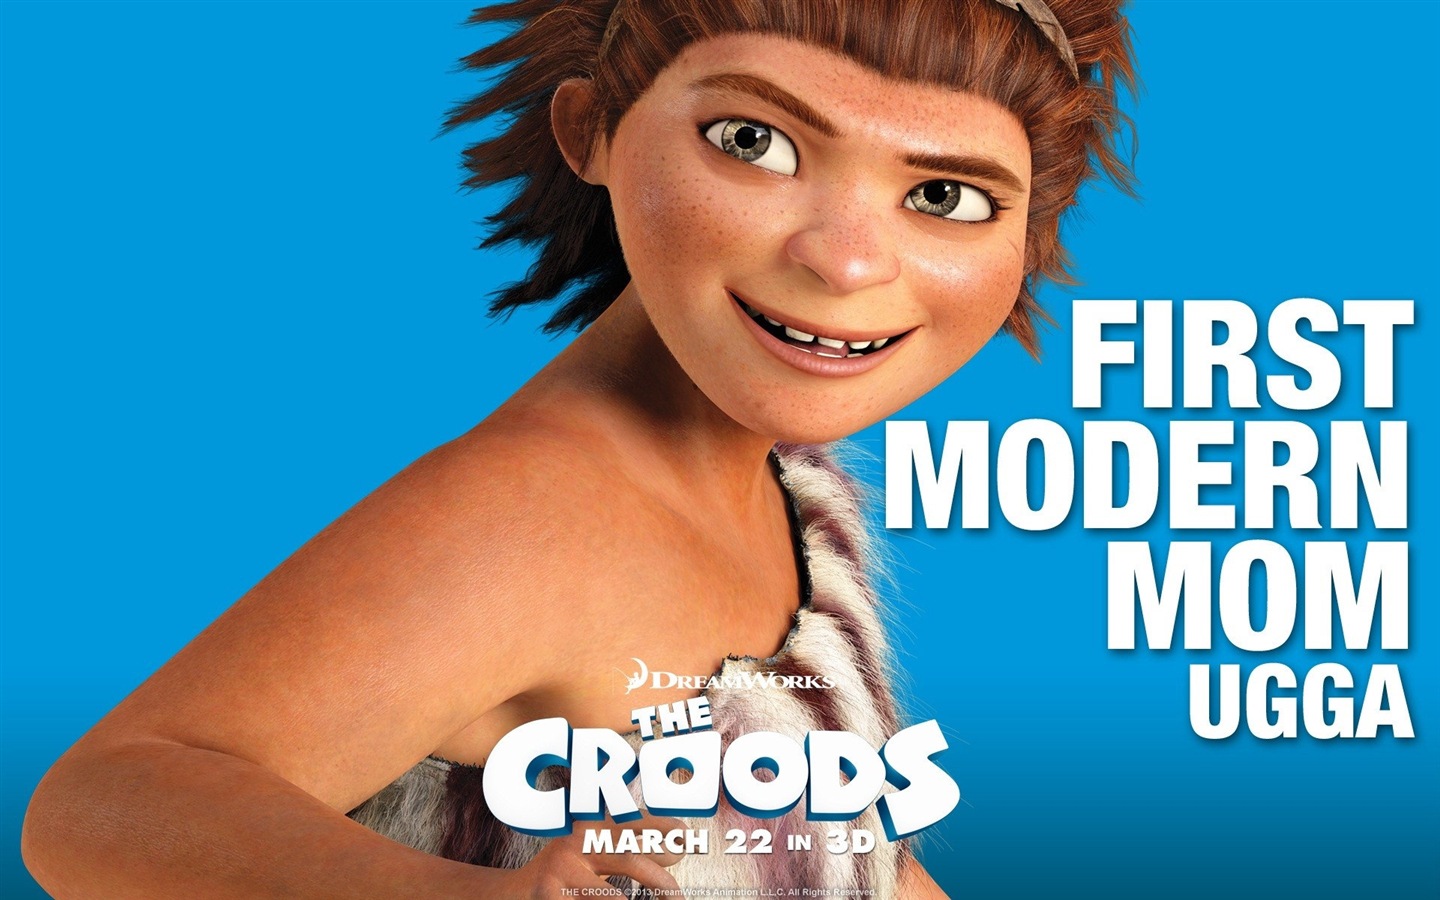 The Croods HD movie wallpapers #7 - 1440x900